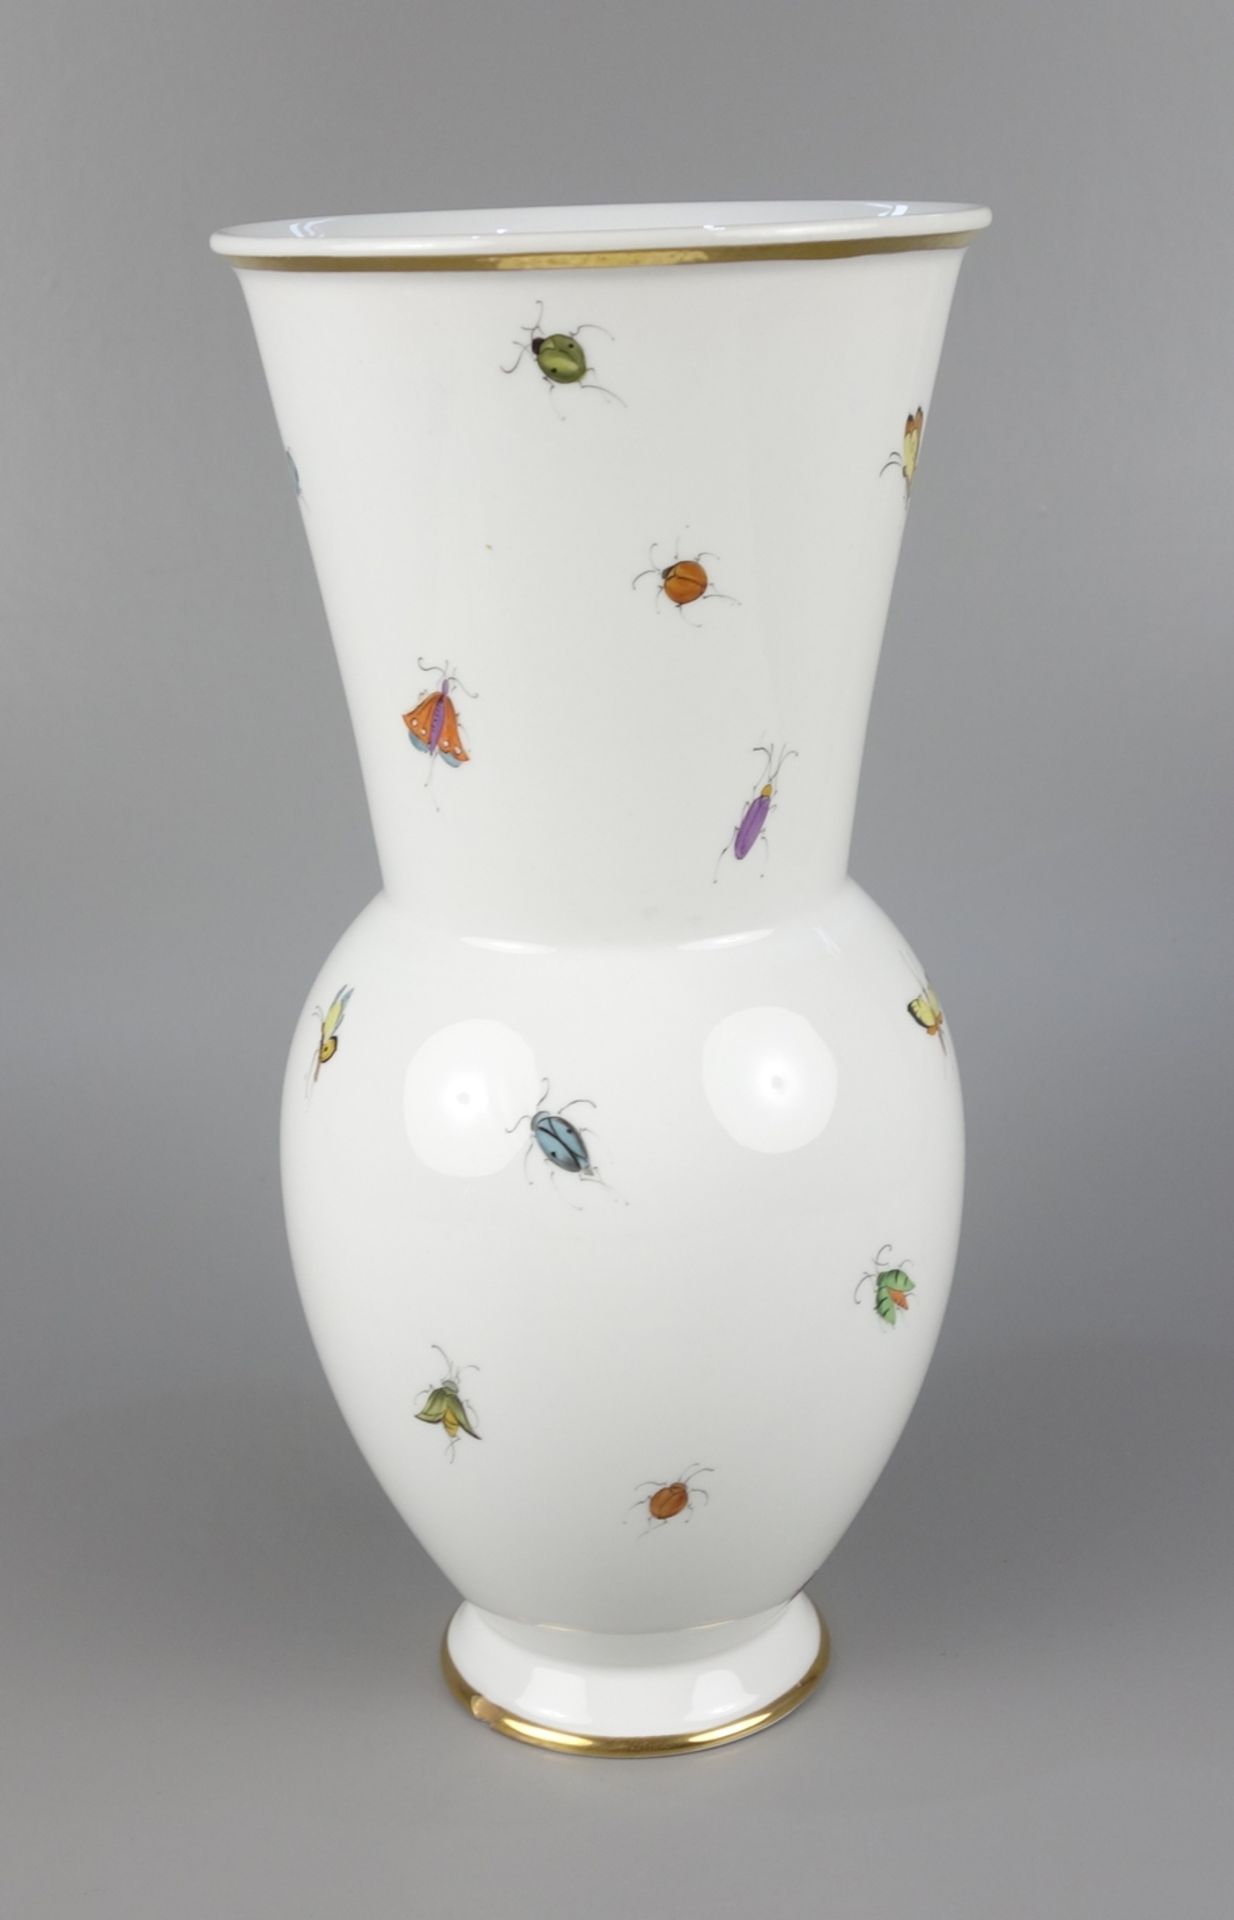 Vase with insect painting, form: Marguerite Friedlaender for KPM Berlin, 1st half 20th century - Image 2 of 4